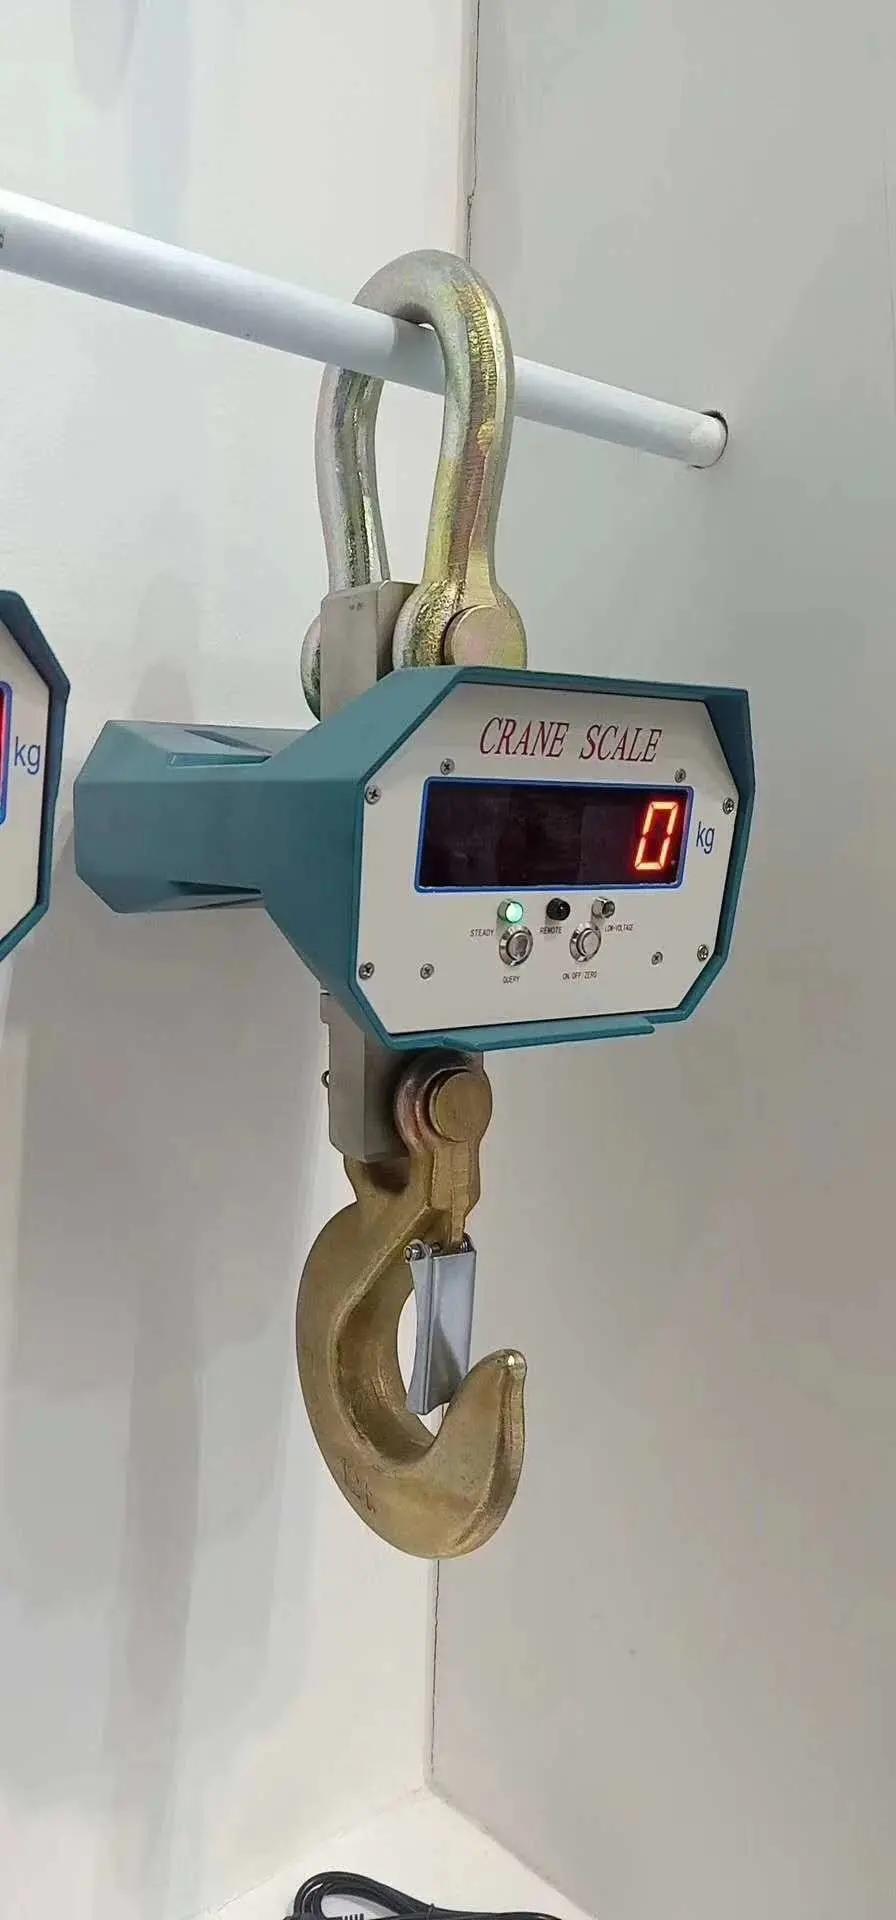 Chinese Portable Digital Hanging Crane Scale 1000kg